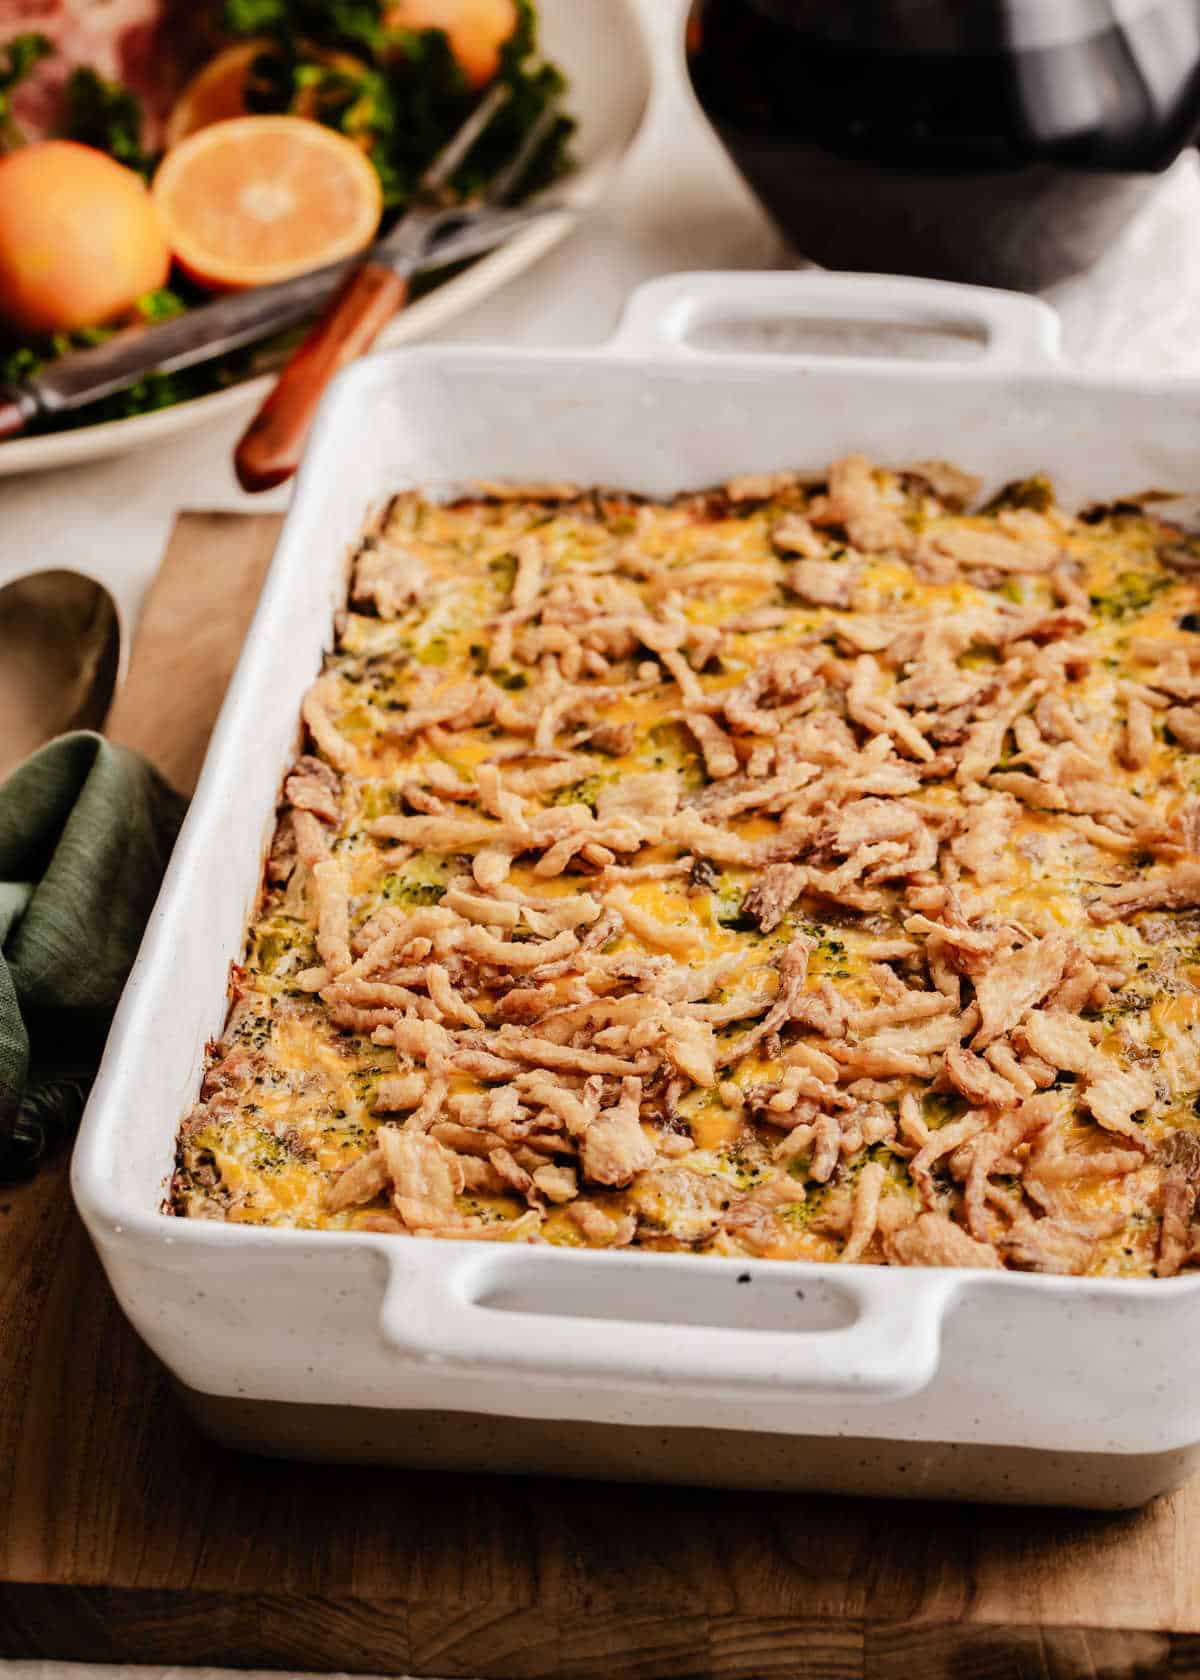 casserole topped with French's fried onions.